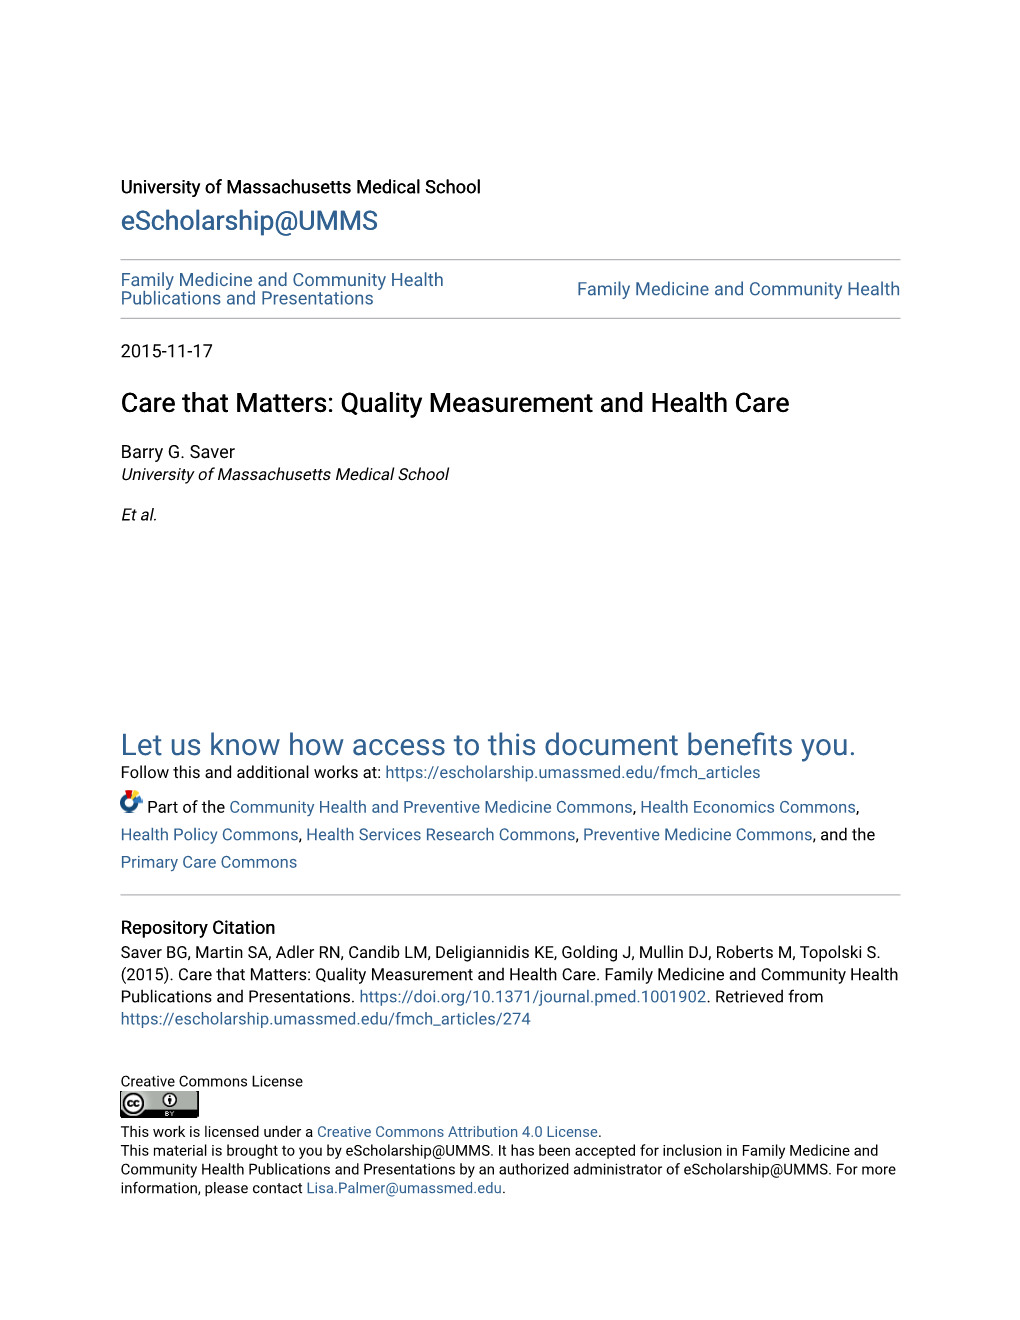 Quality Measurement and Health Care